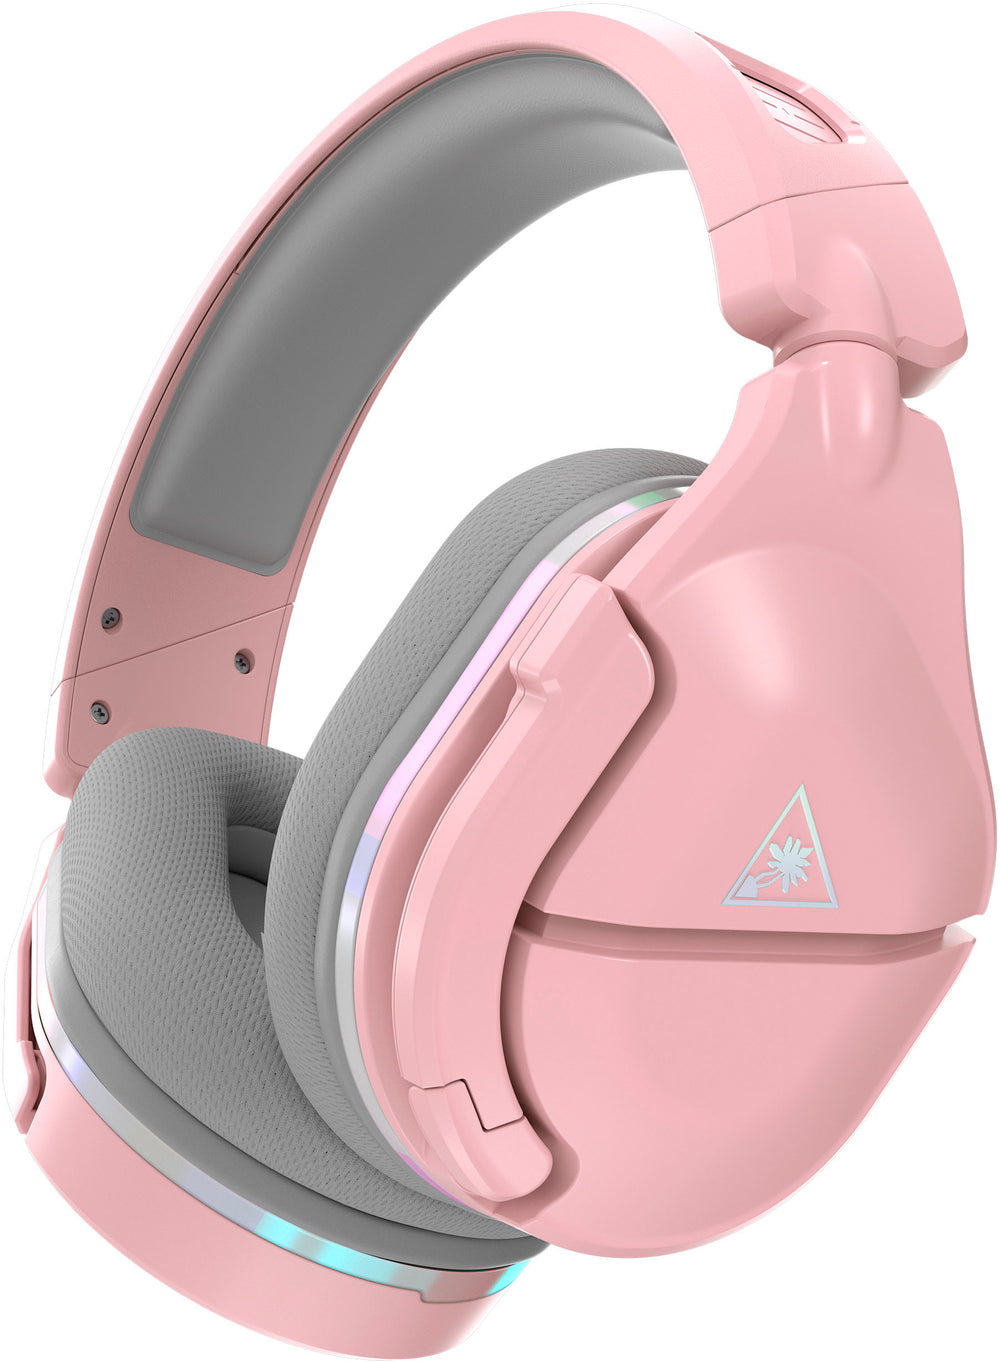 Turtle Beach - Stealth 600 Gen 2 MAX Wireless Multiplatform Gaming Headset for Xbox, PS5, PS4, Nintendo Switch and PC - 48 Hour Battery - Pink_1